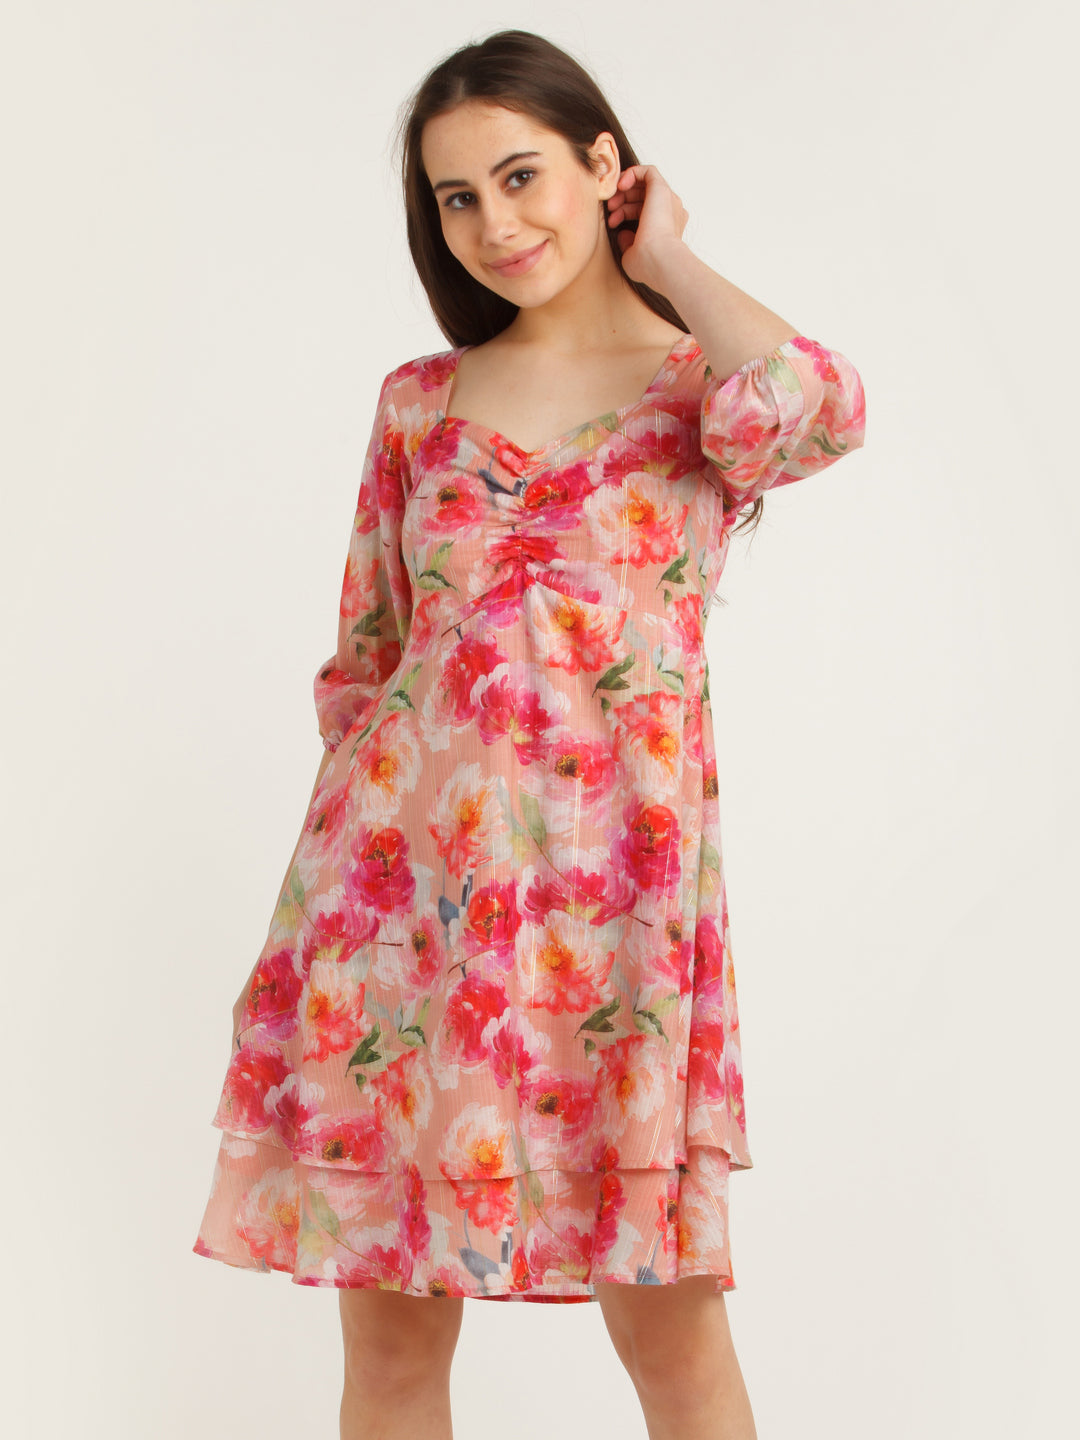 Pink Printed Layered Short Dress For Women